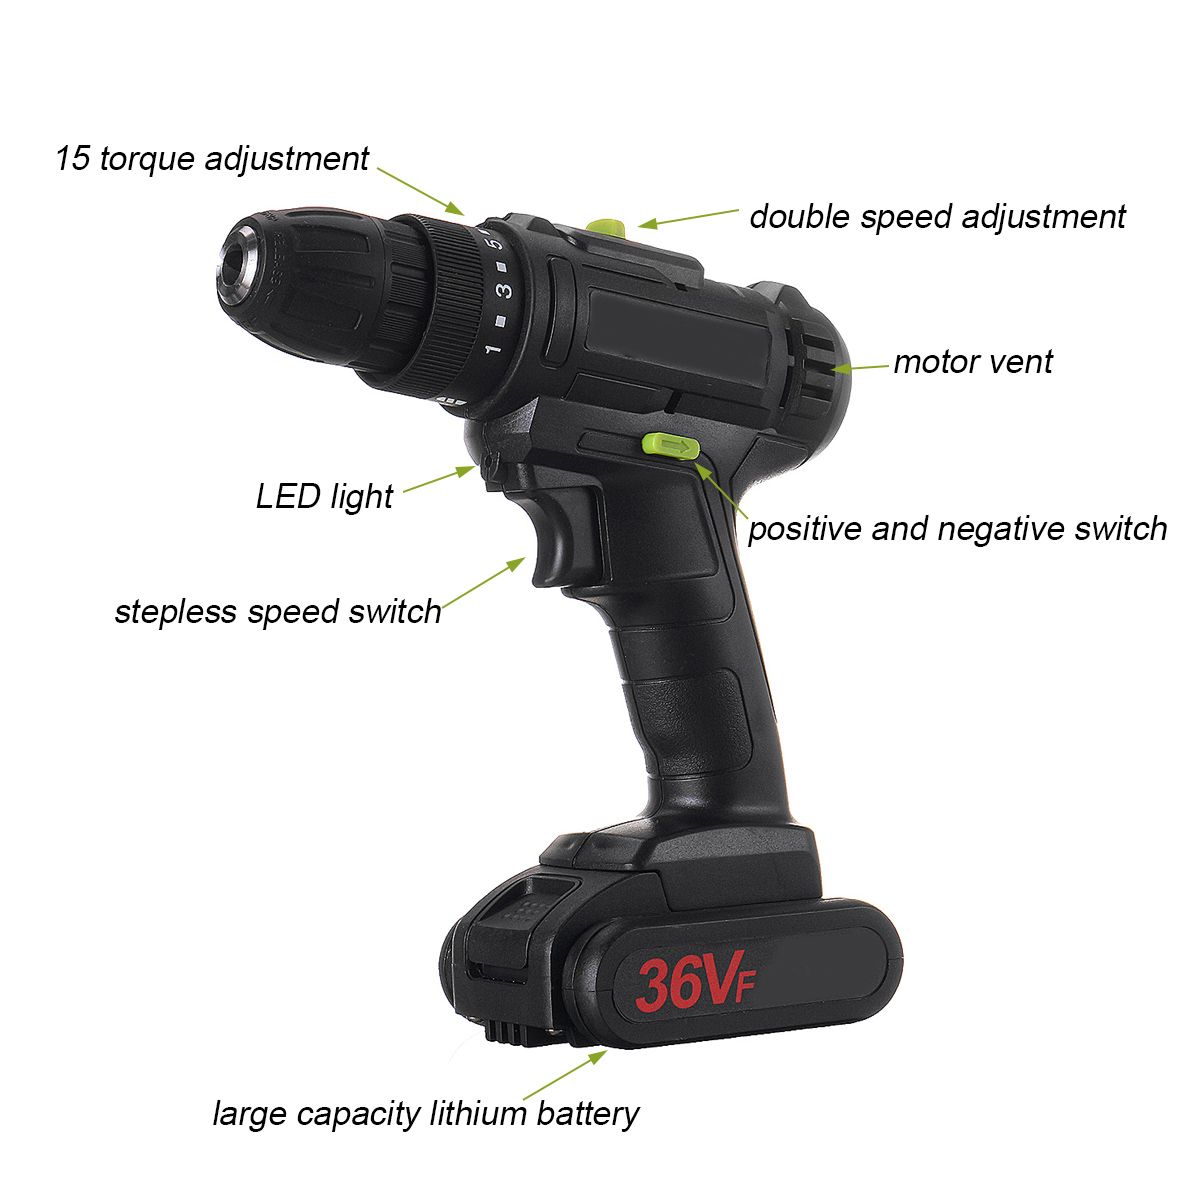 21V-1500mAH-LED-Light-Electric-Drill-Driver-Cordless-Rechargeable-Hand-Drills-2-Speed-Home-DIY-1574103